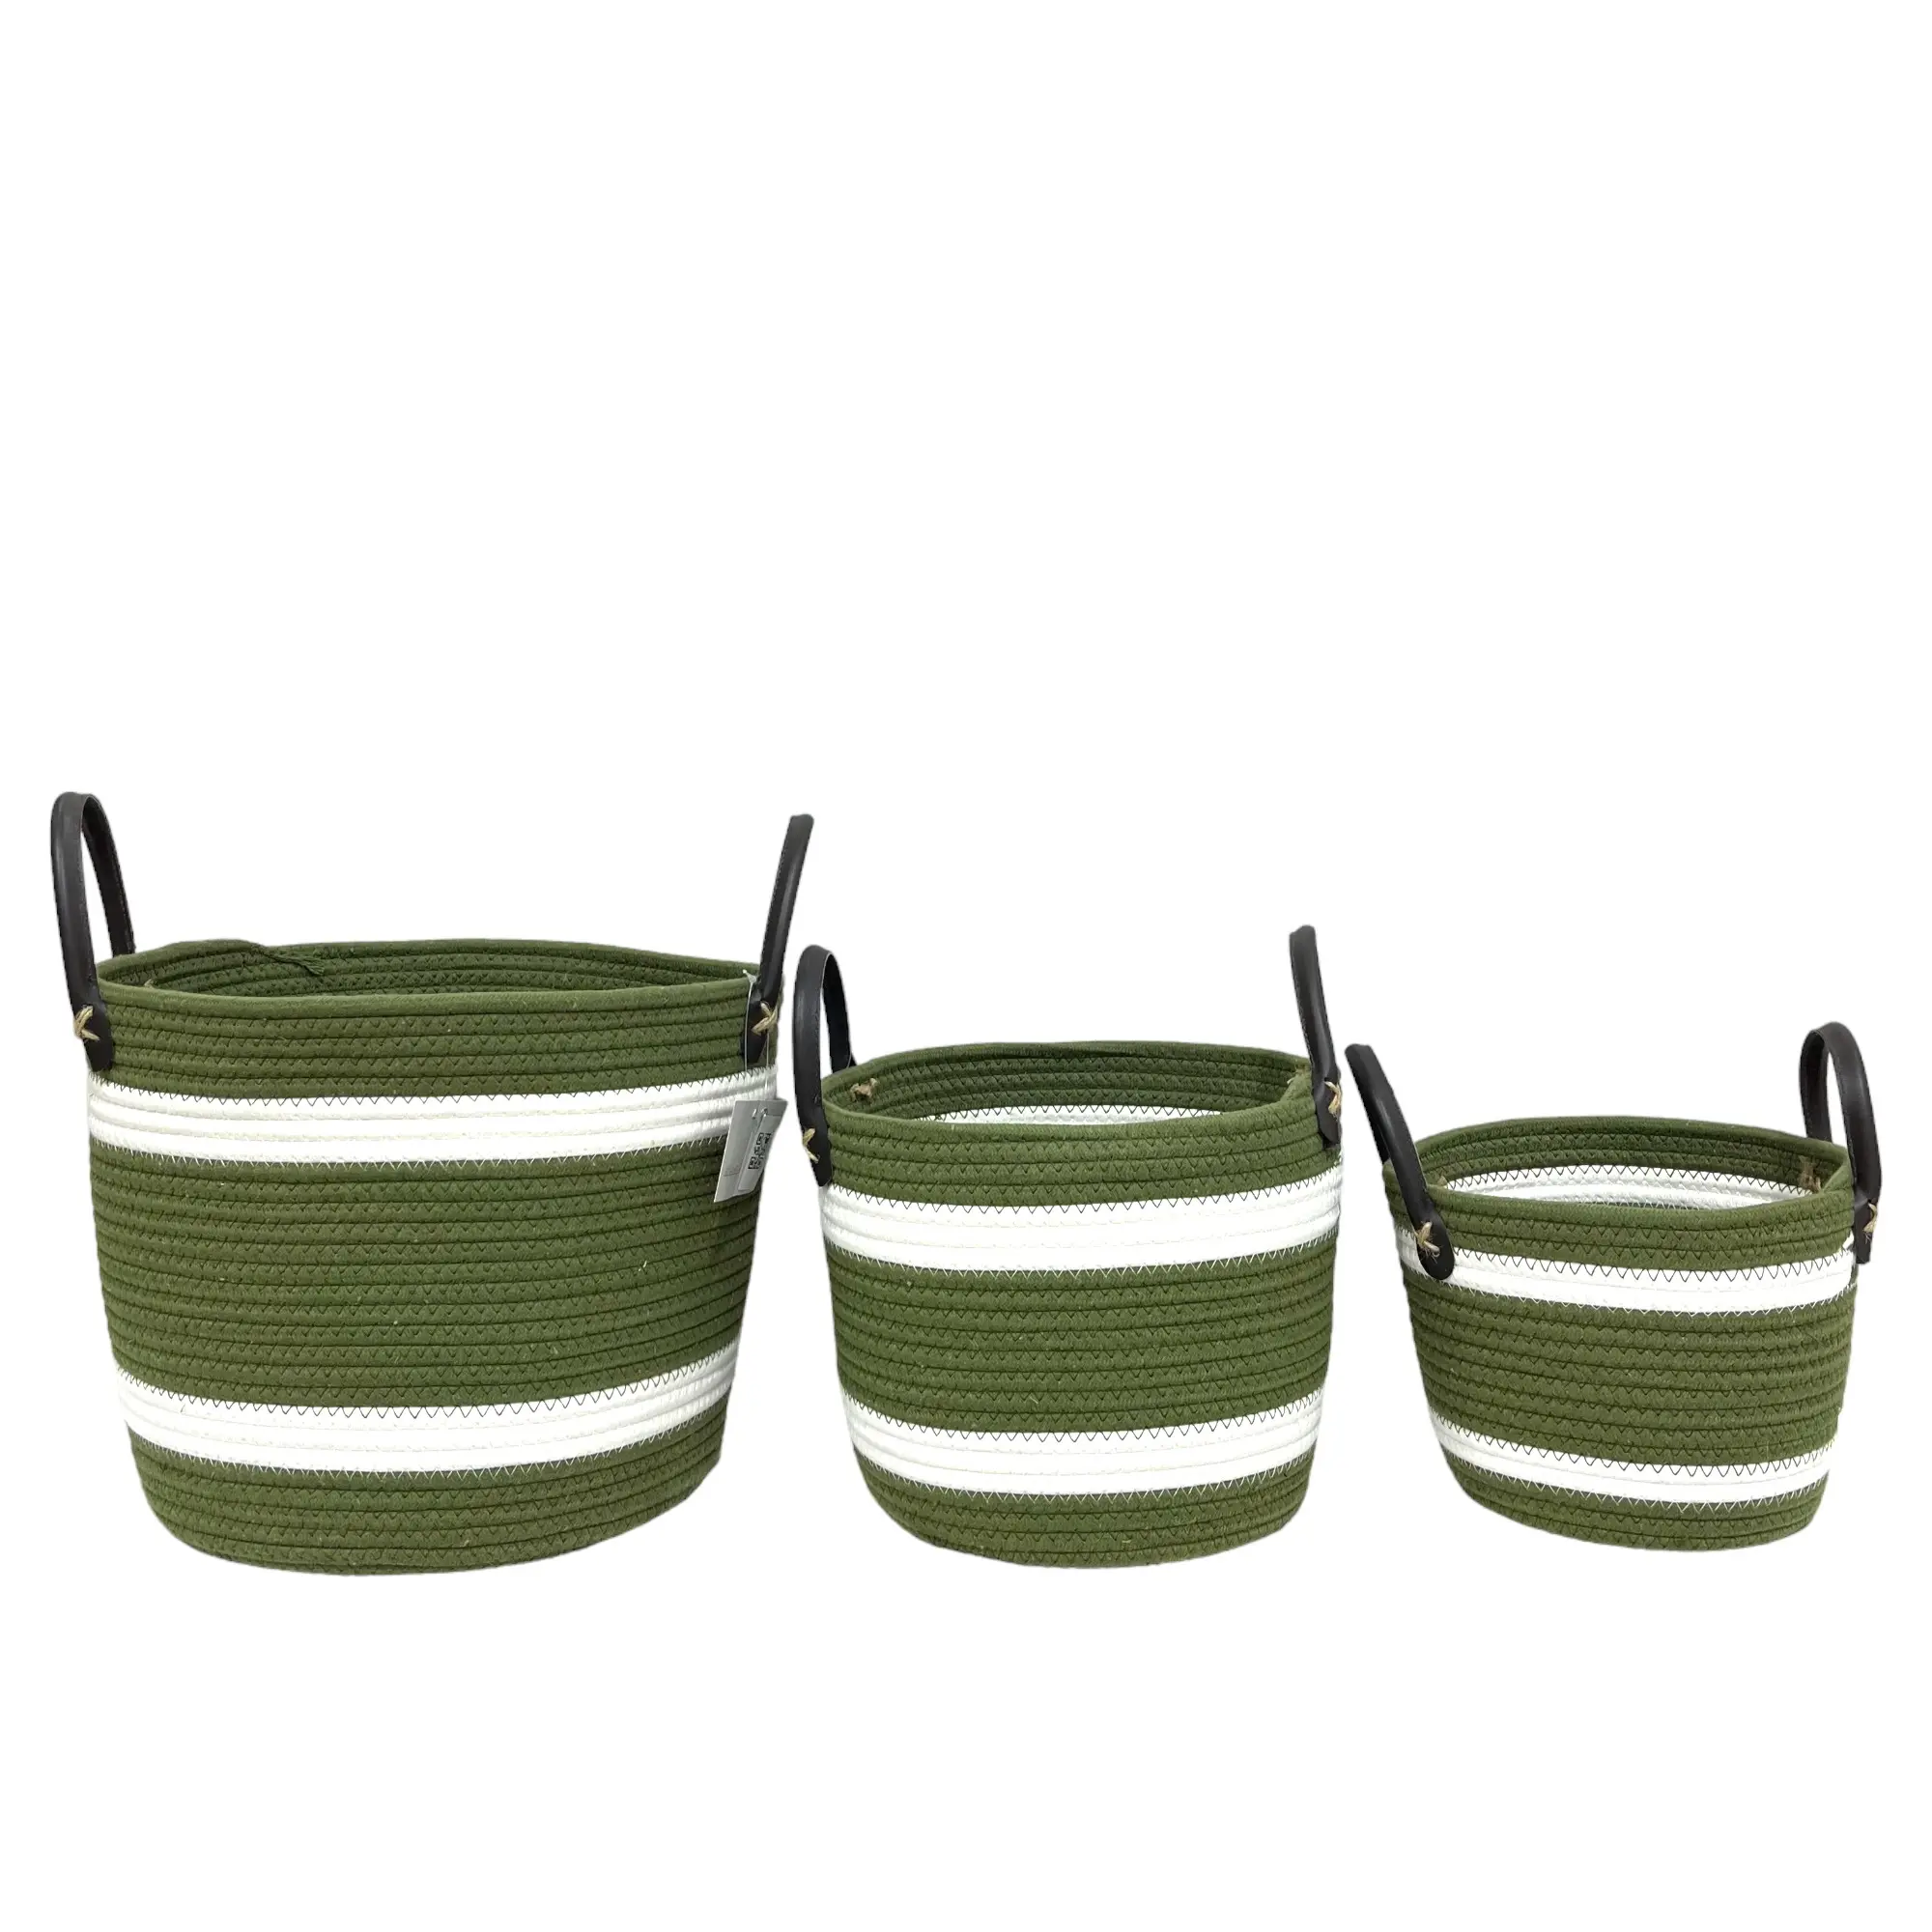 Best Price Hand Woven Storage Craft Bins Cotton Rope Wicker Laundry Basket With Handles For Home Storage